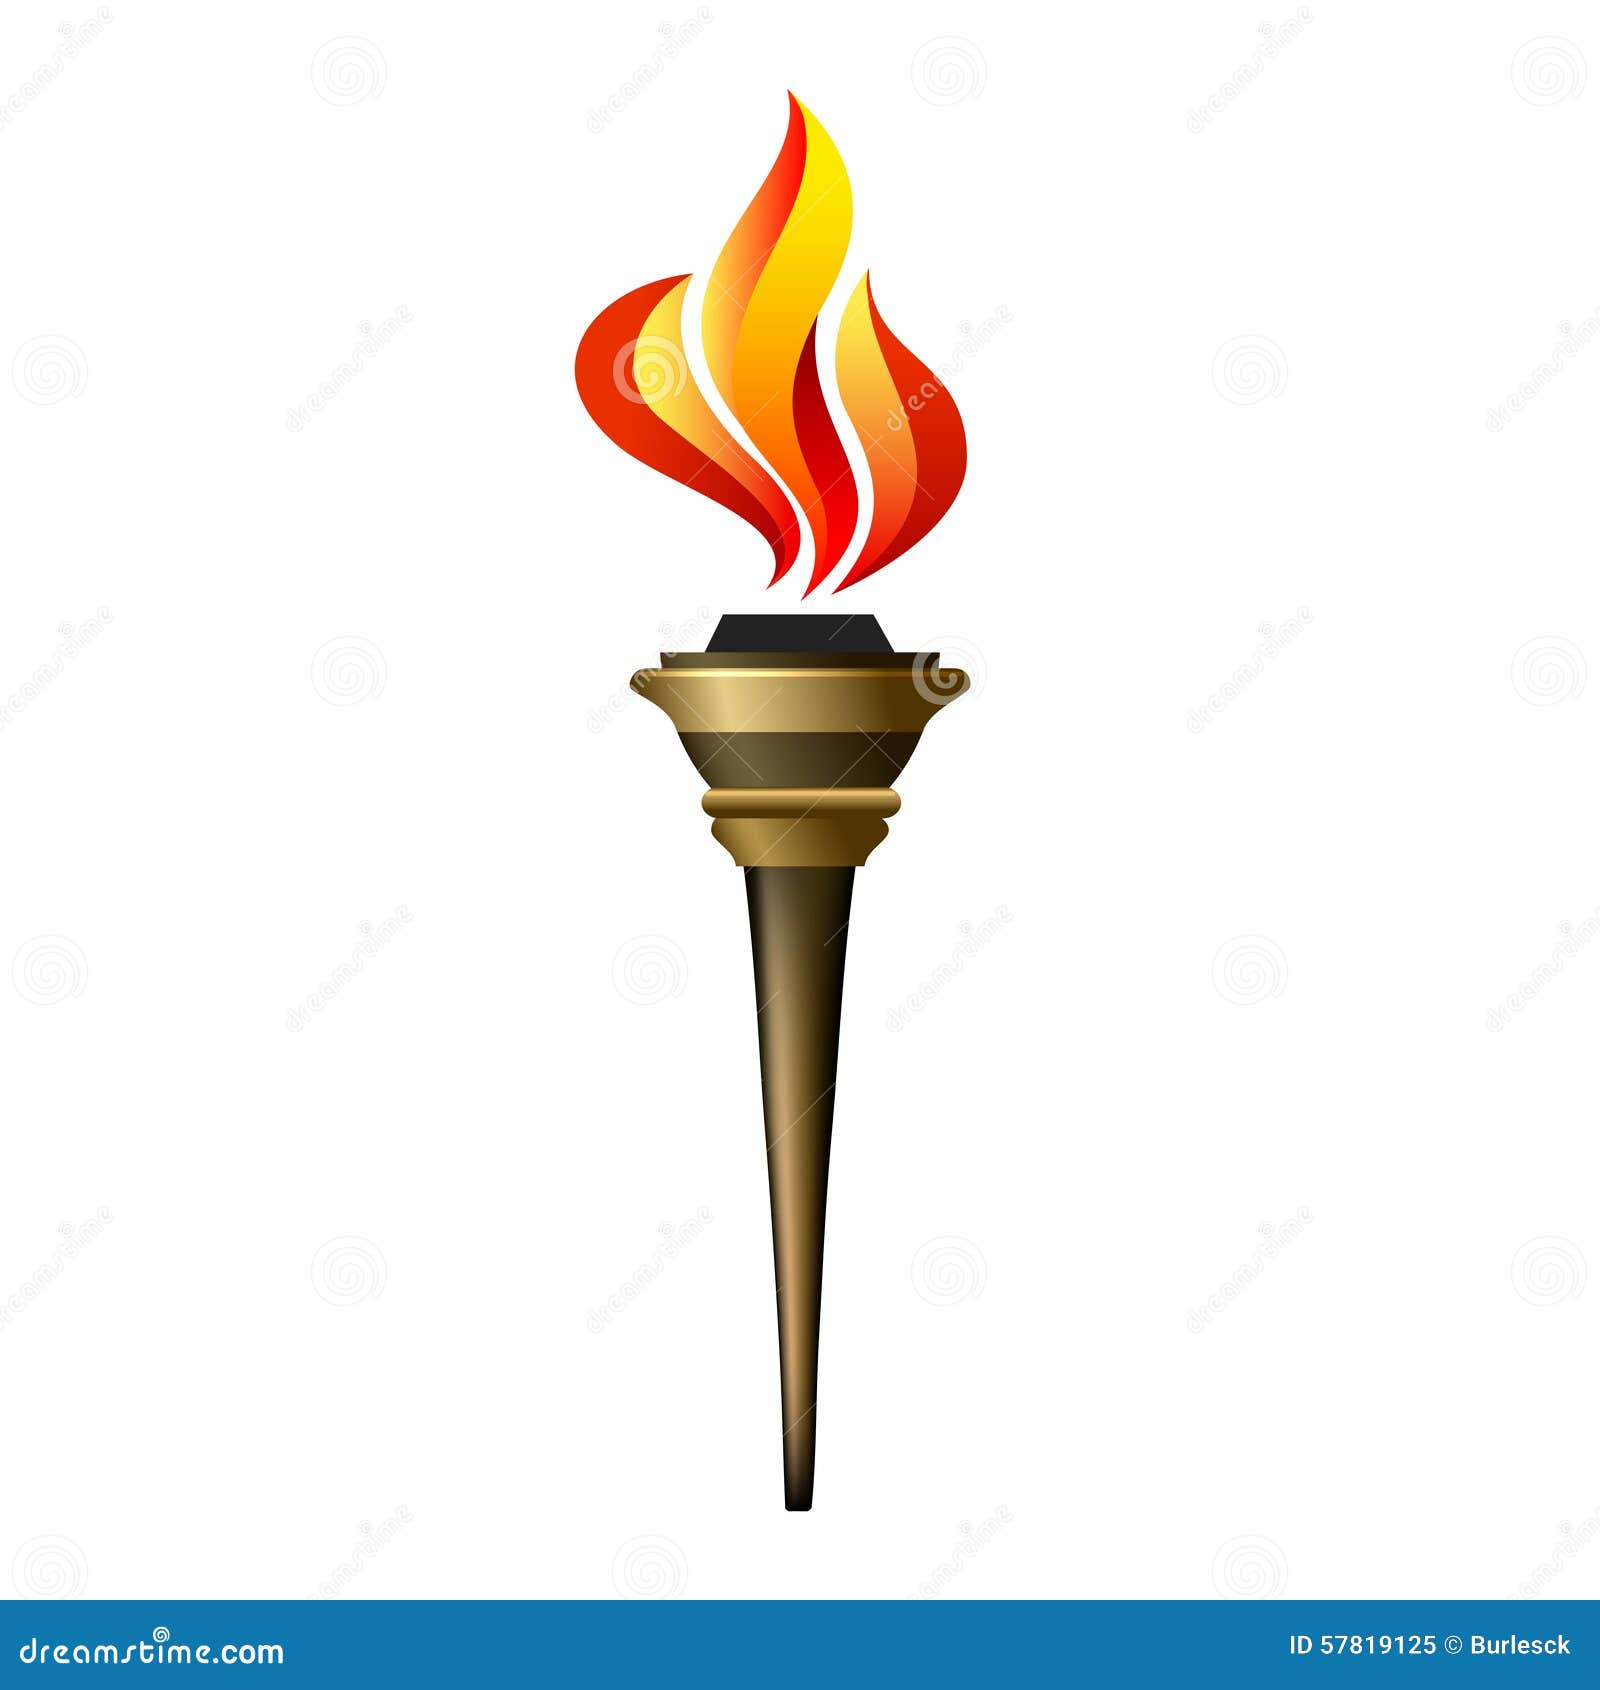 vector clipart torch - photo #5